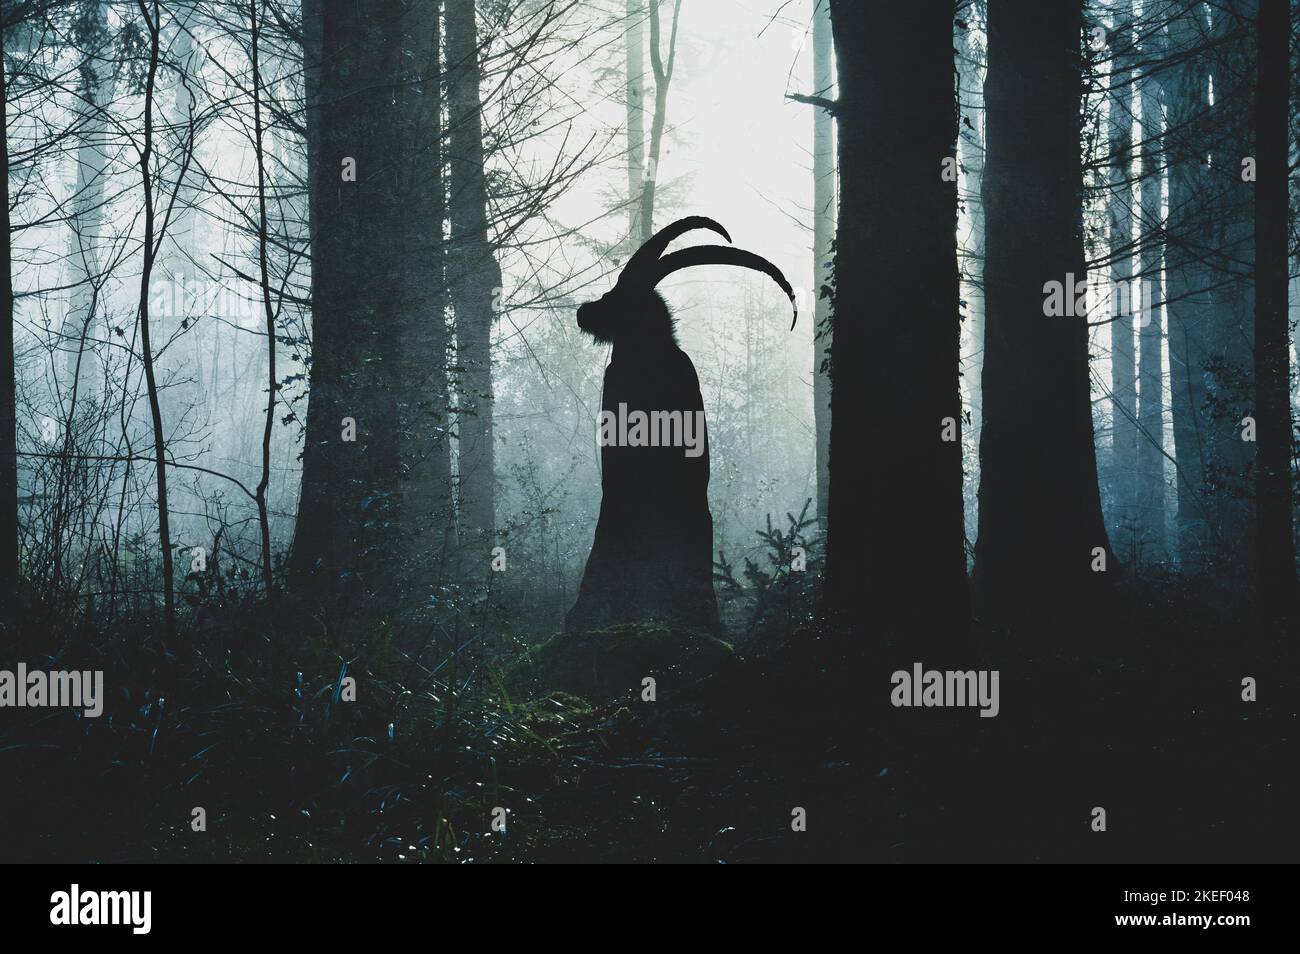 A fantasy concept of a pagan horned goat like figure. Silhouetted against the light. In a spooky forest in winter. With a textured edit. Stock Photo